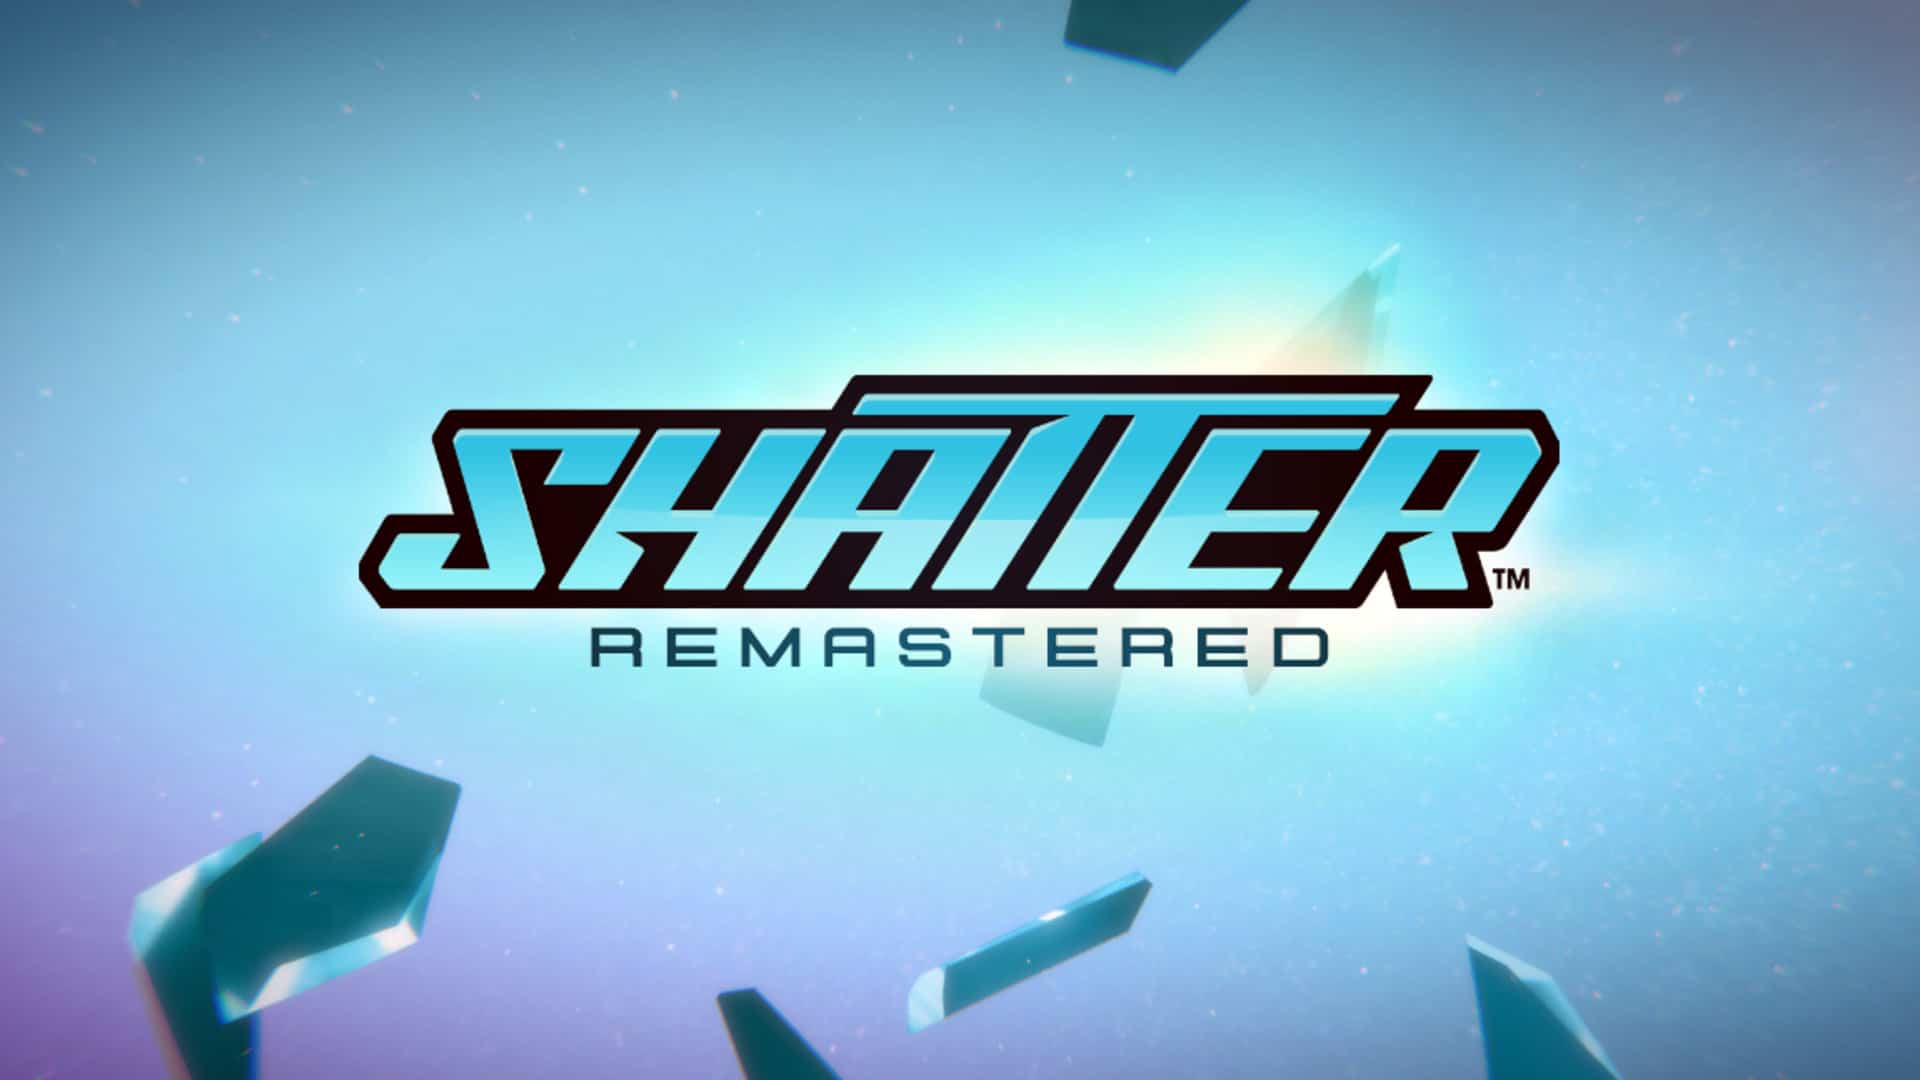 Shatter Remastered Deluxe is coming in late 2022